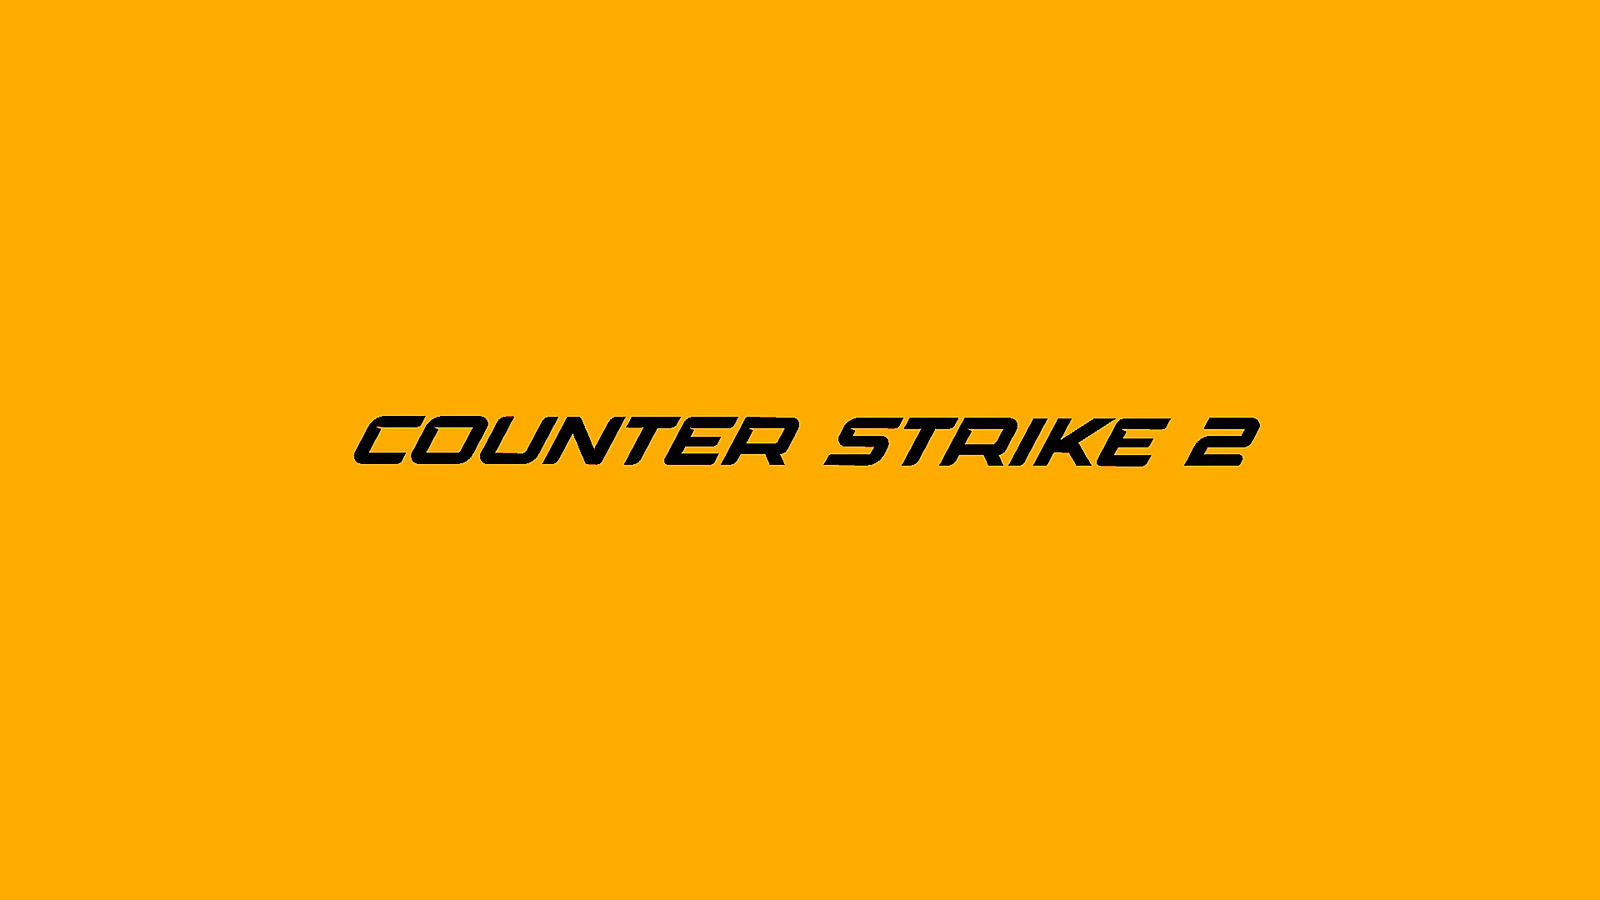 Is Counter-Strike 2 Free on Steam?